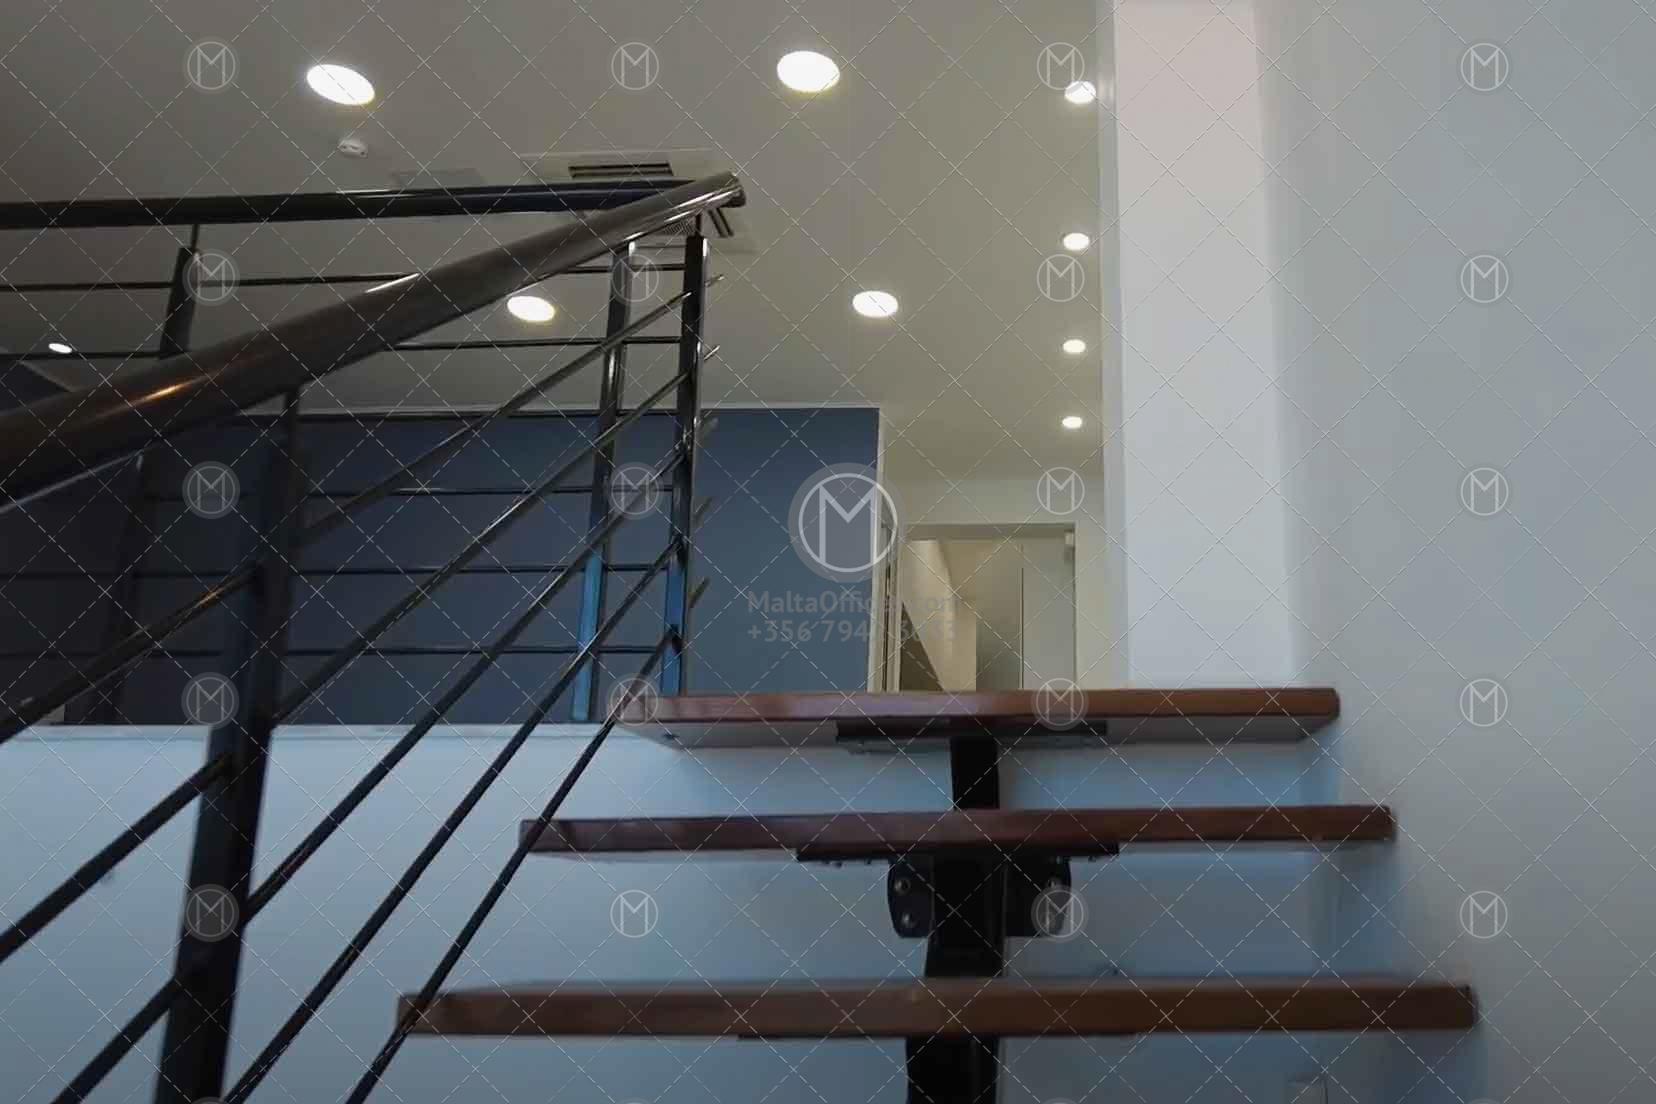 75 sqm Seafront Sliema Office for Rent -